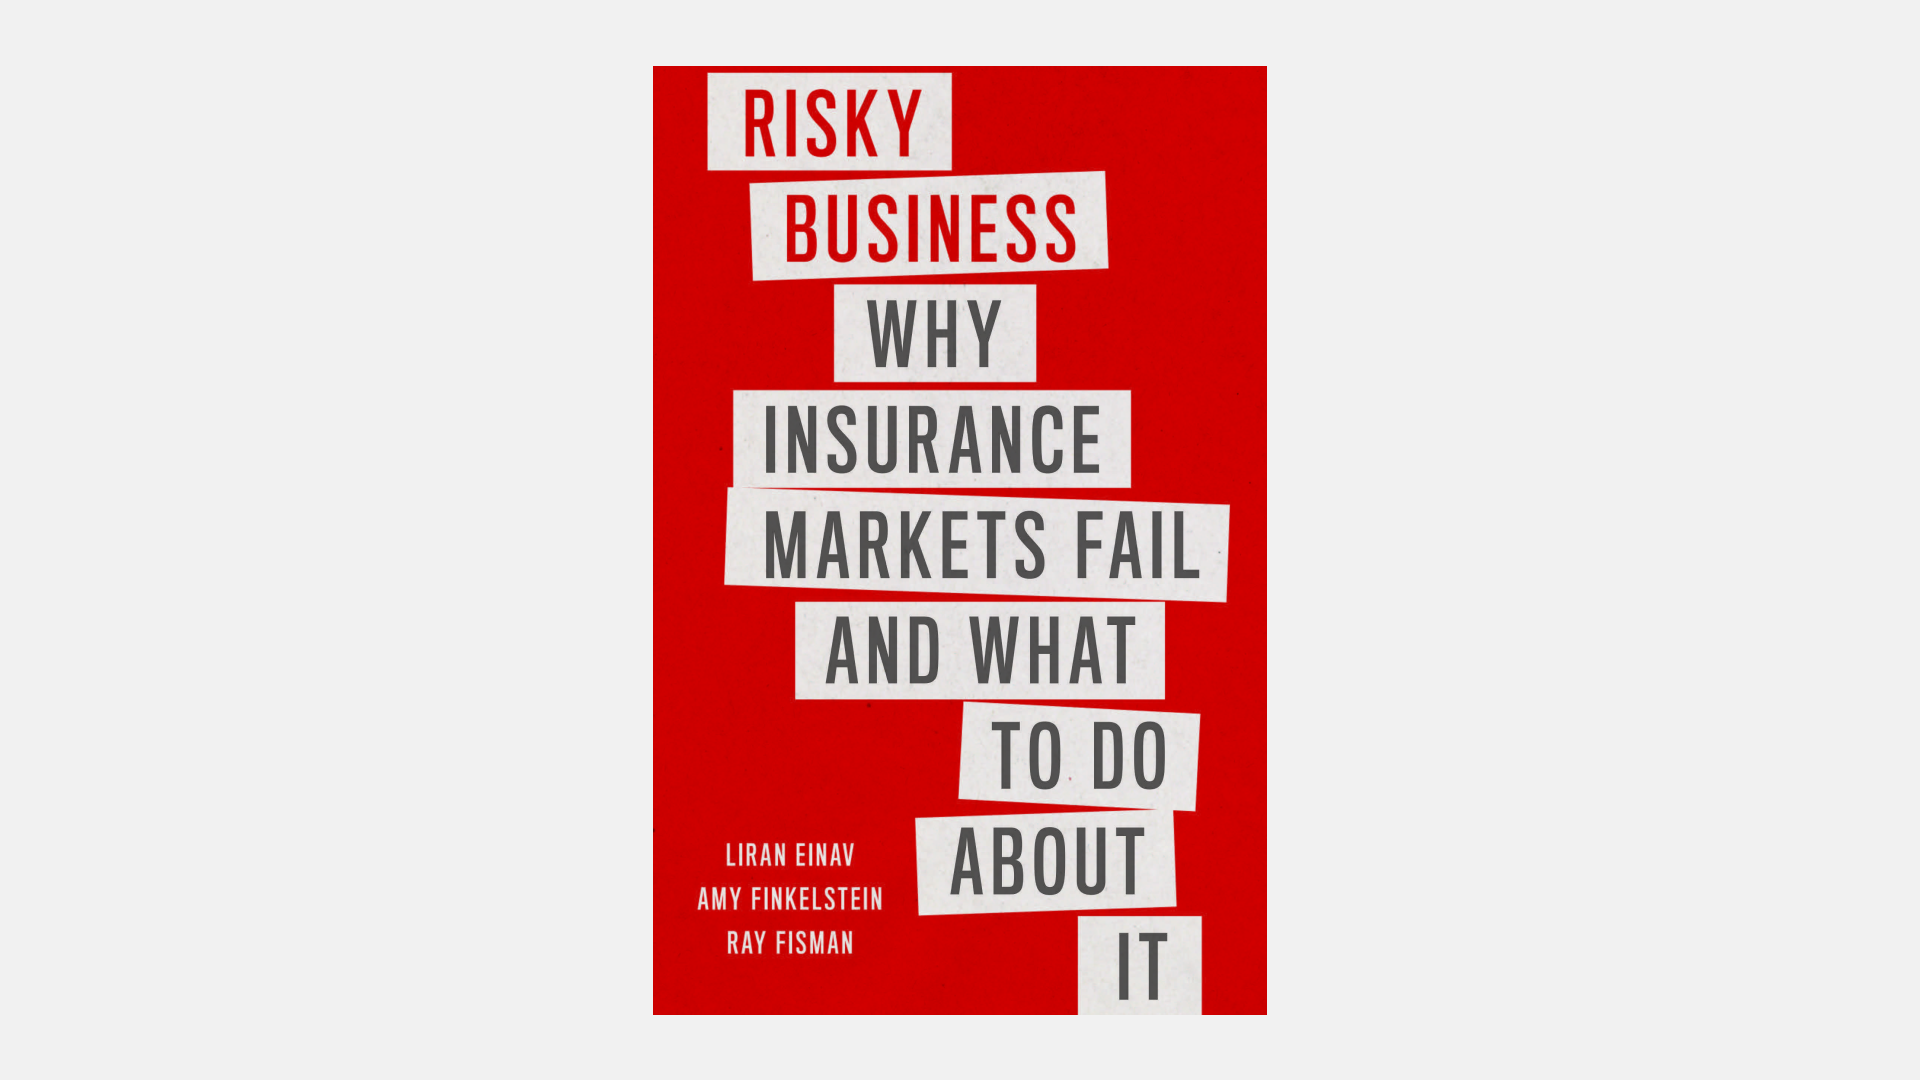 book cover that says risky business why insurance markets fail and what to do about it by liran einav amy finkelstein and ray fisman